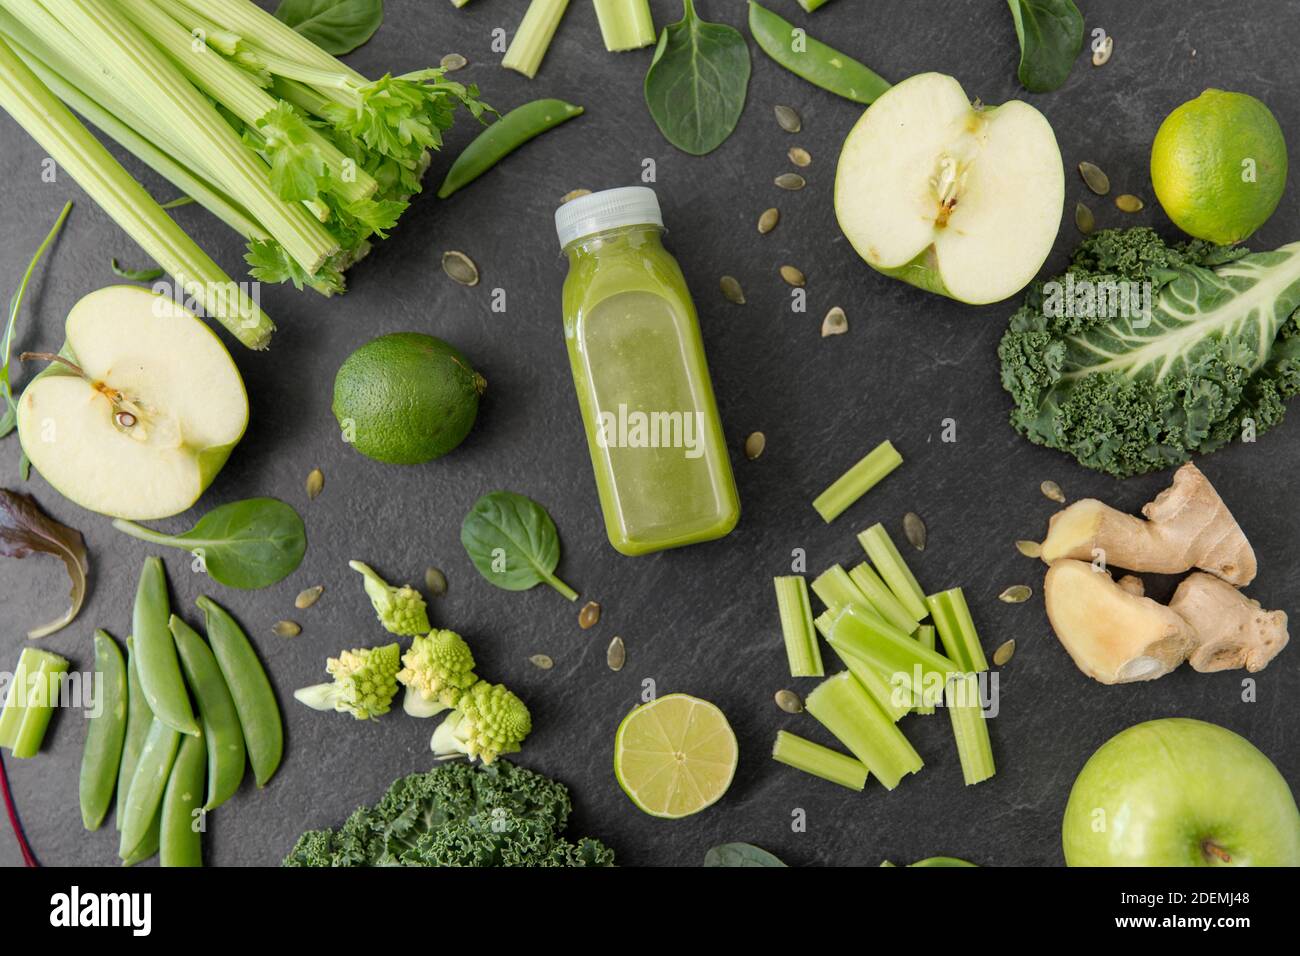 close up of bottle with green juice and vegetables Stock Photo